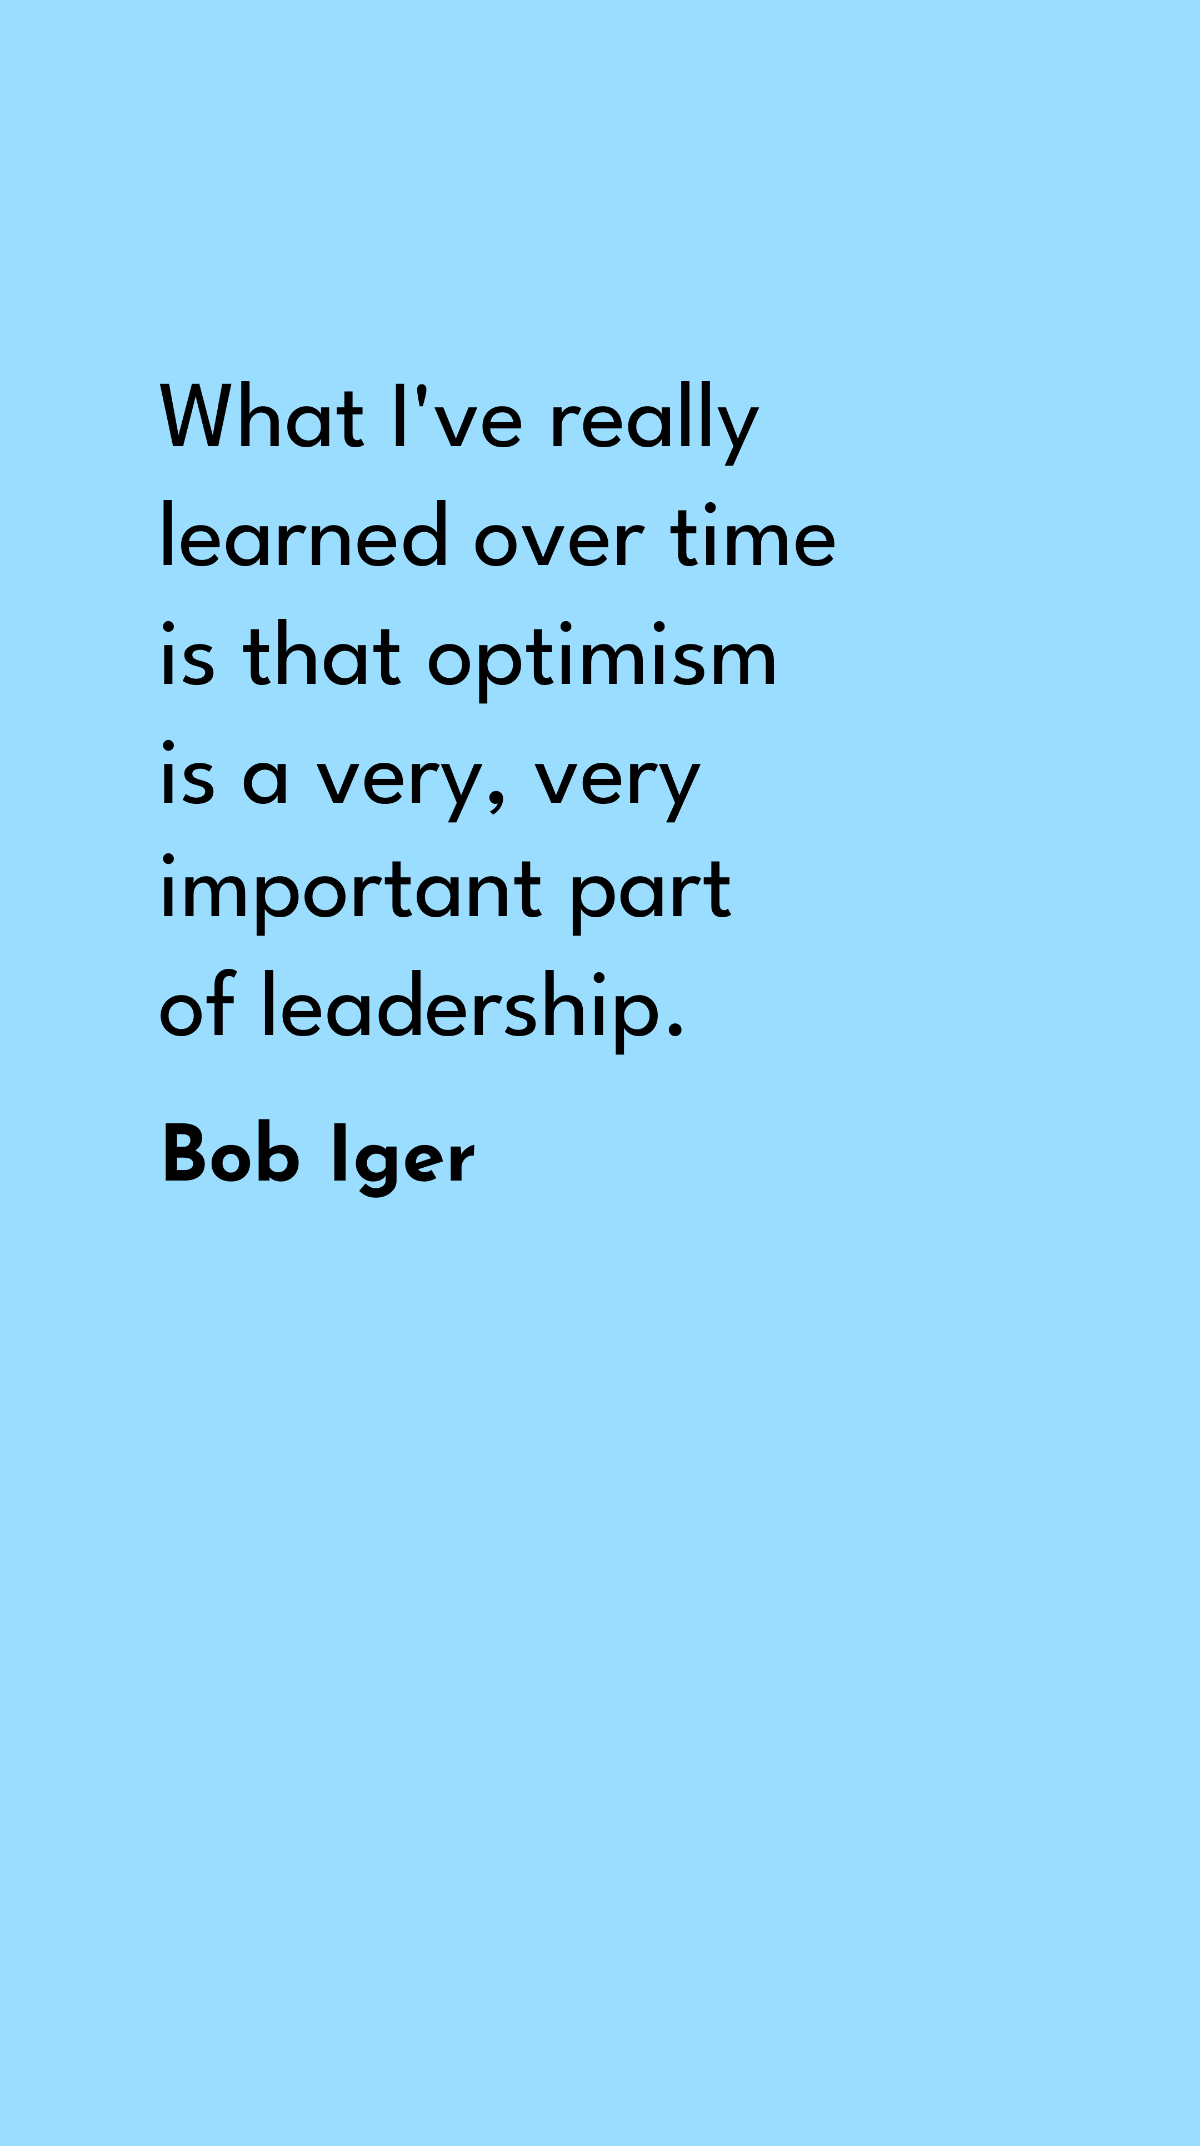 Bob Iger - What I've really learned over time is that optimism is a very, very important part of leadership. Template